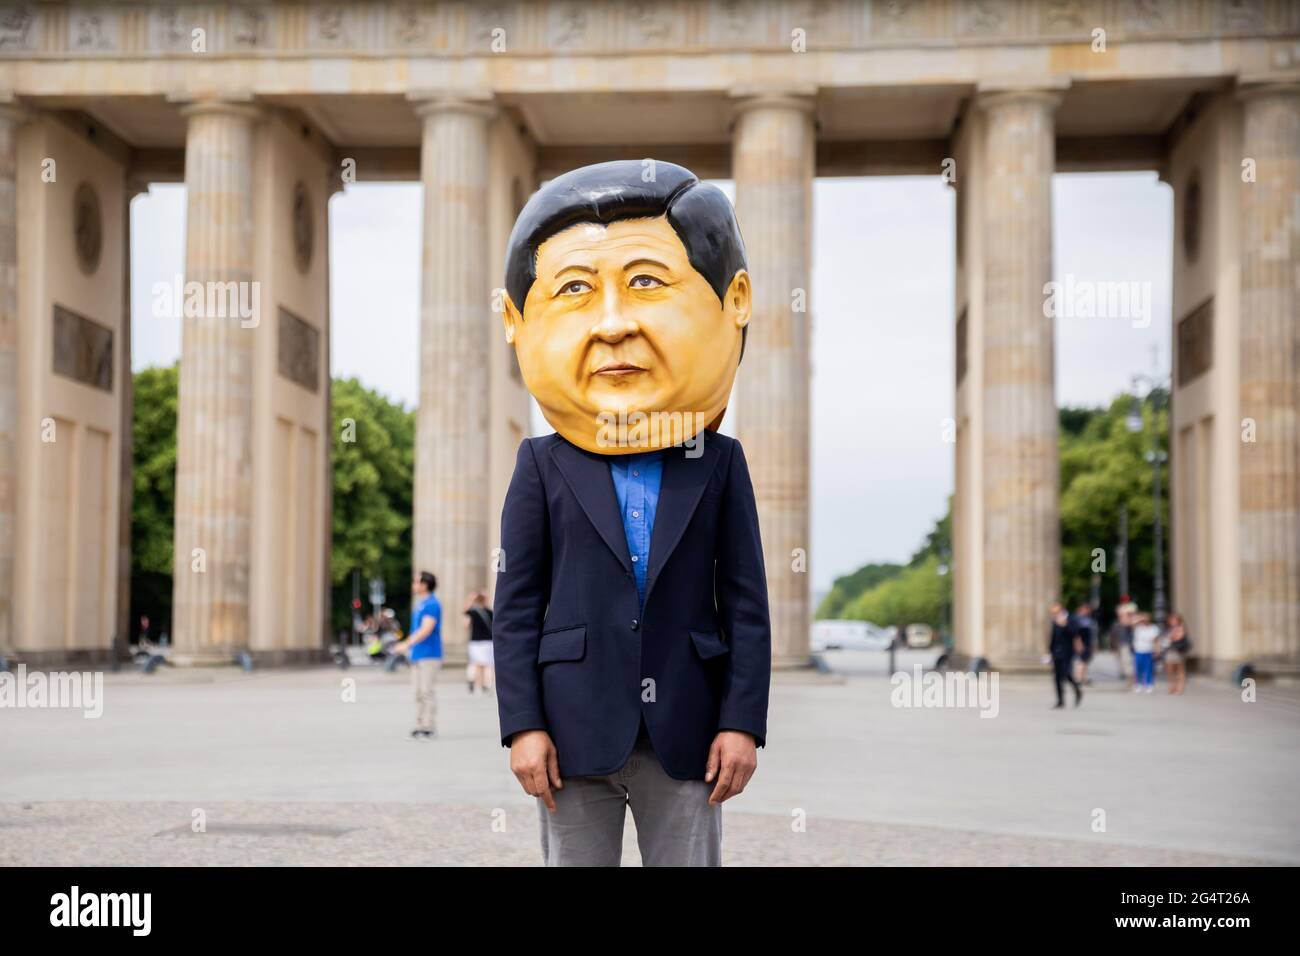 Berlin, Germany. 23rd June, 2021. A participant in a protest by several human rights organizations against the awarding of the 2022 Winter Olympics to Beijing stands in front of the Brandenburg Gate wearing a mask meant to represent Chinese President Xi Jinping. Credit: Christoph Soeder/dpa/Alamy Live News Stock Photo